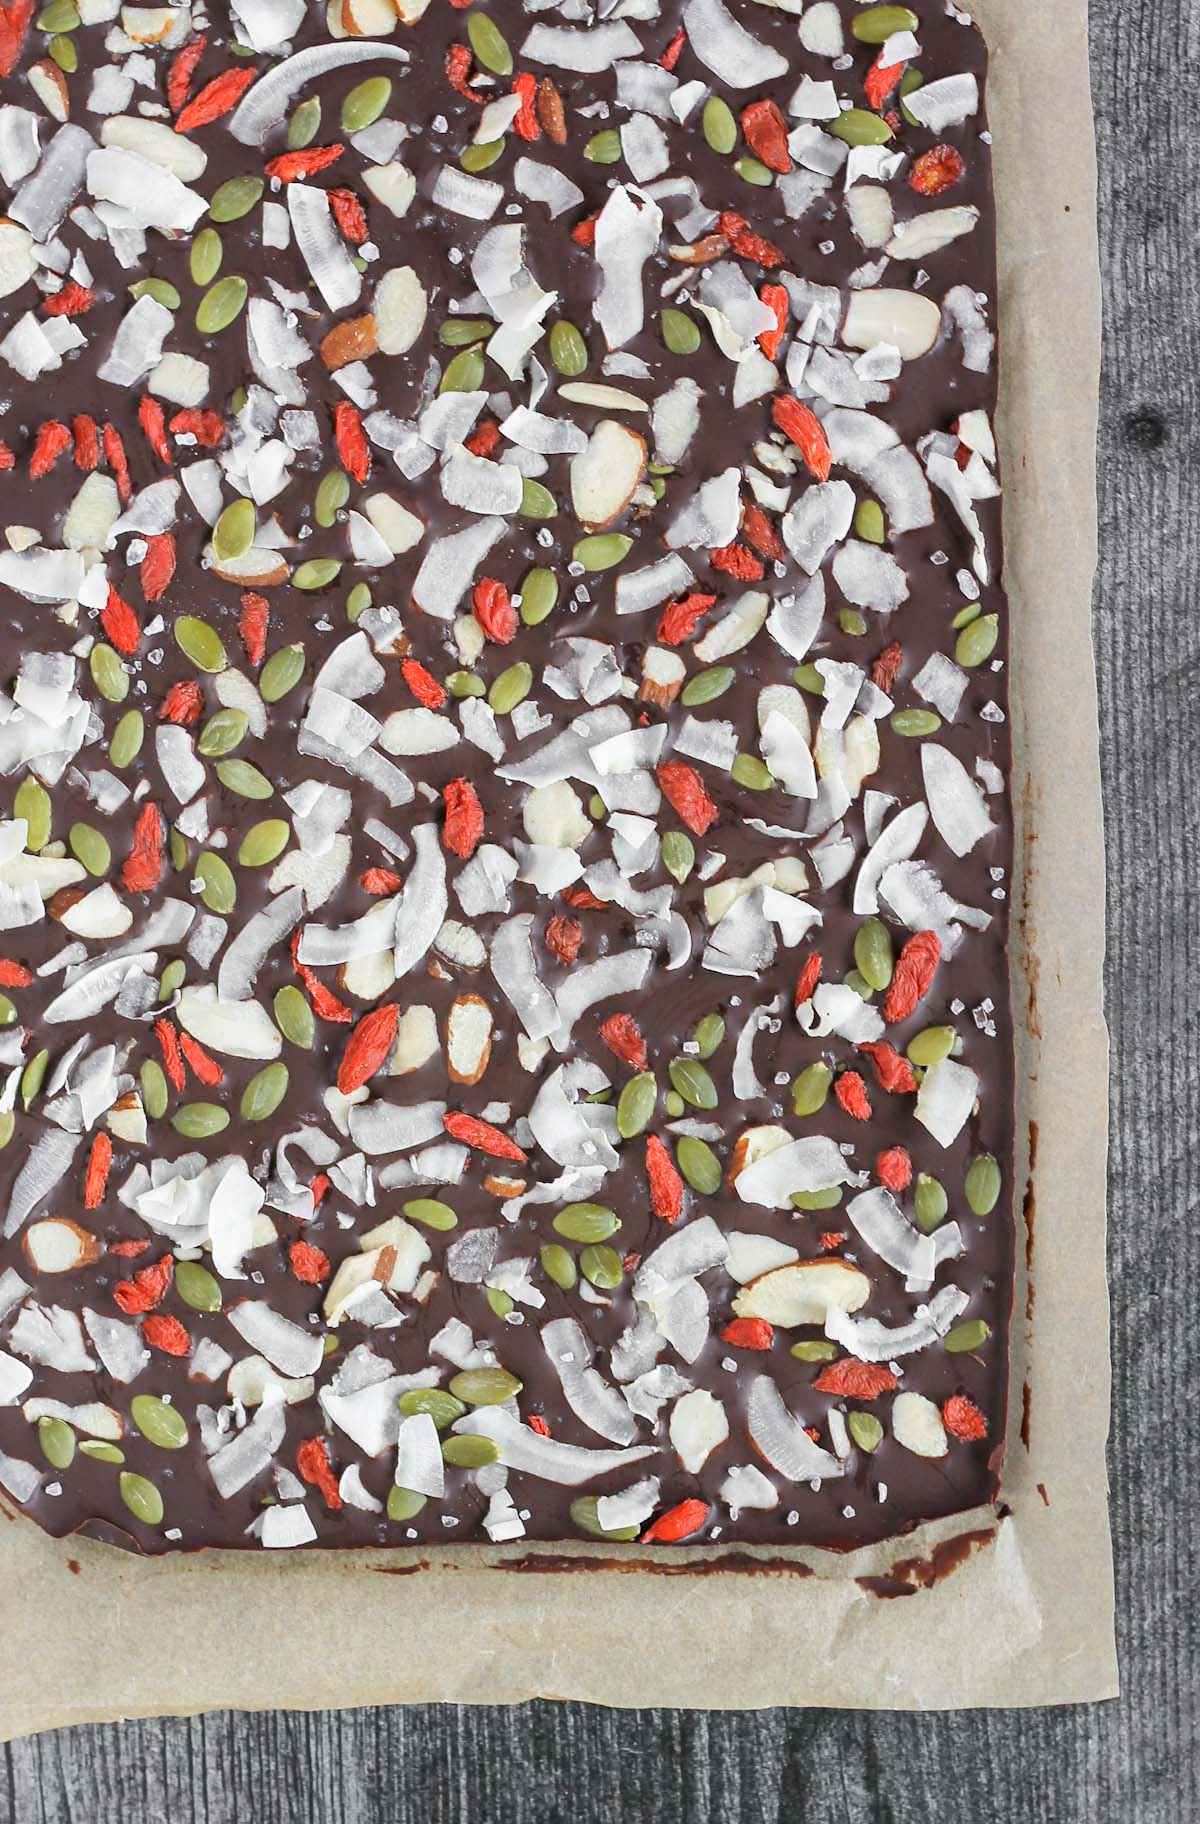 Large sheet of solid chocolate bark with dried fruit, nuts, and seeds.